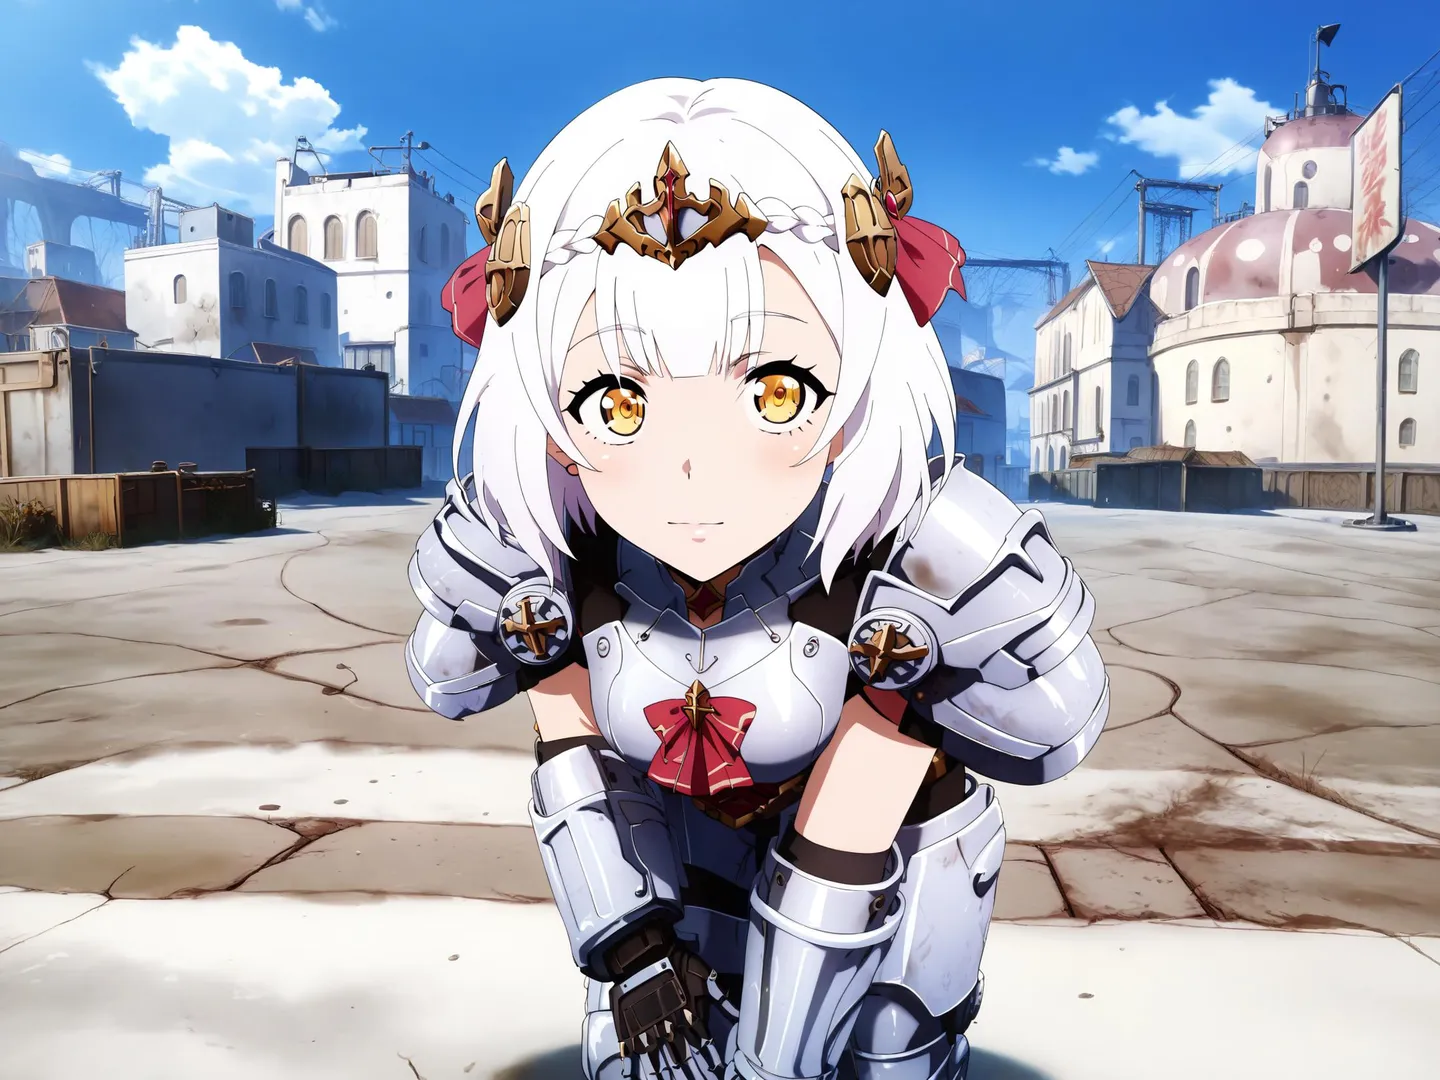 Anime-style illustration of a female knight in armor with white hair and golden eyes, generated using stable diffusion.